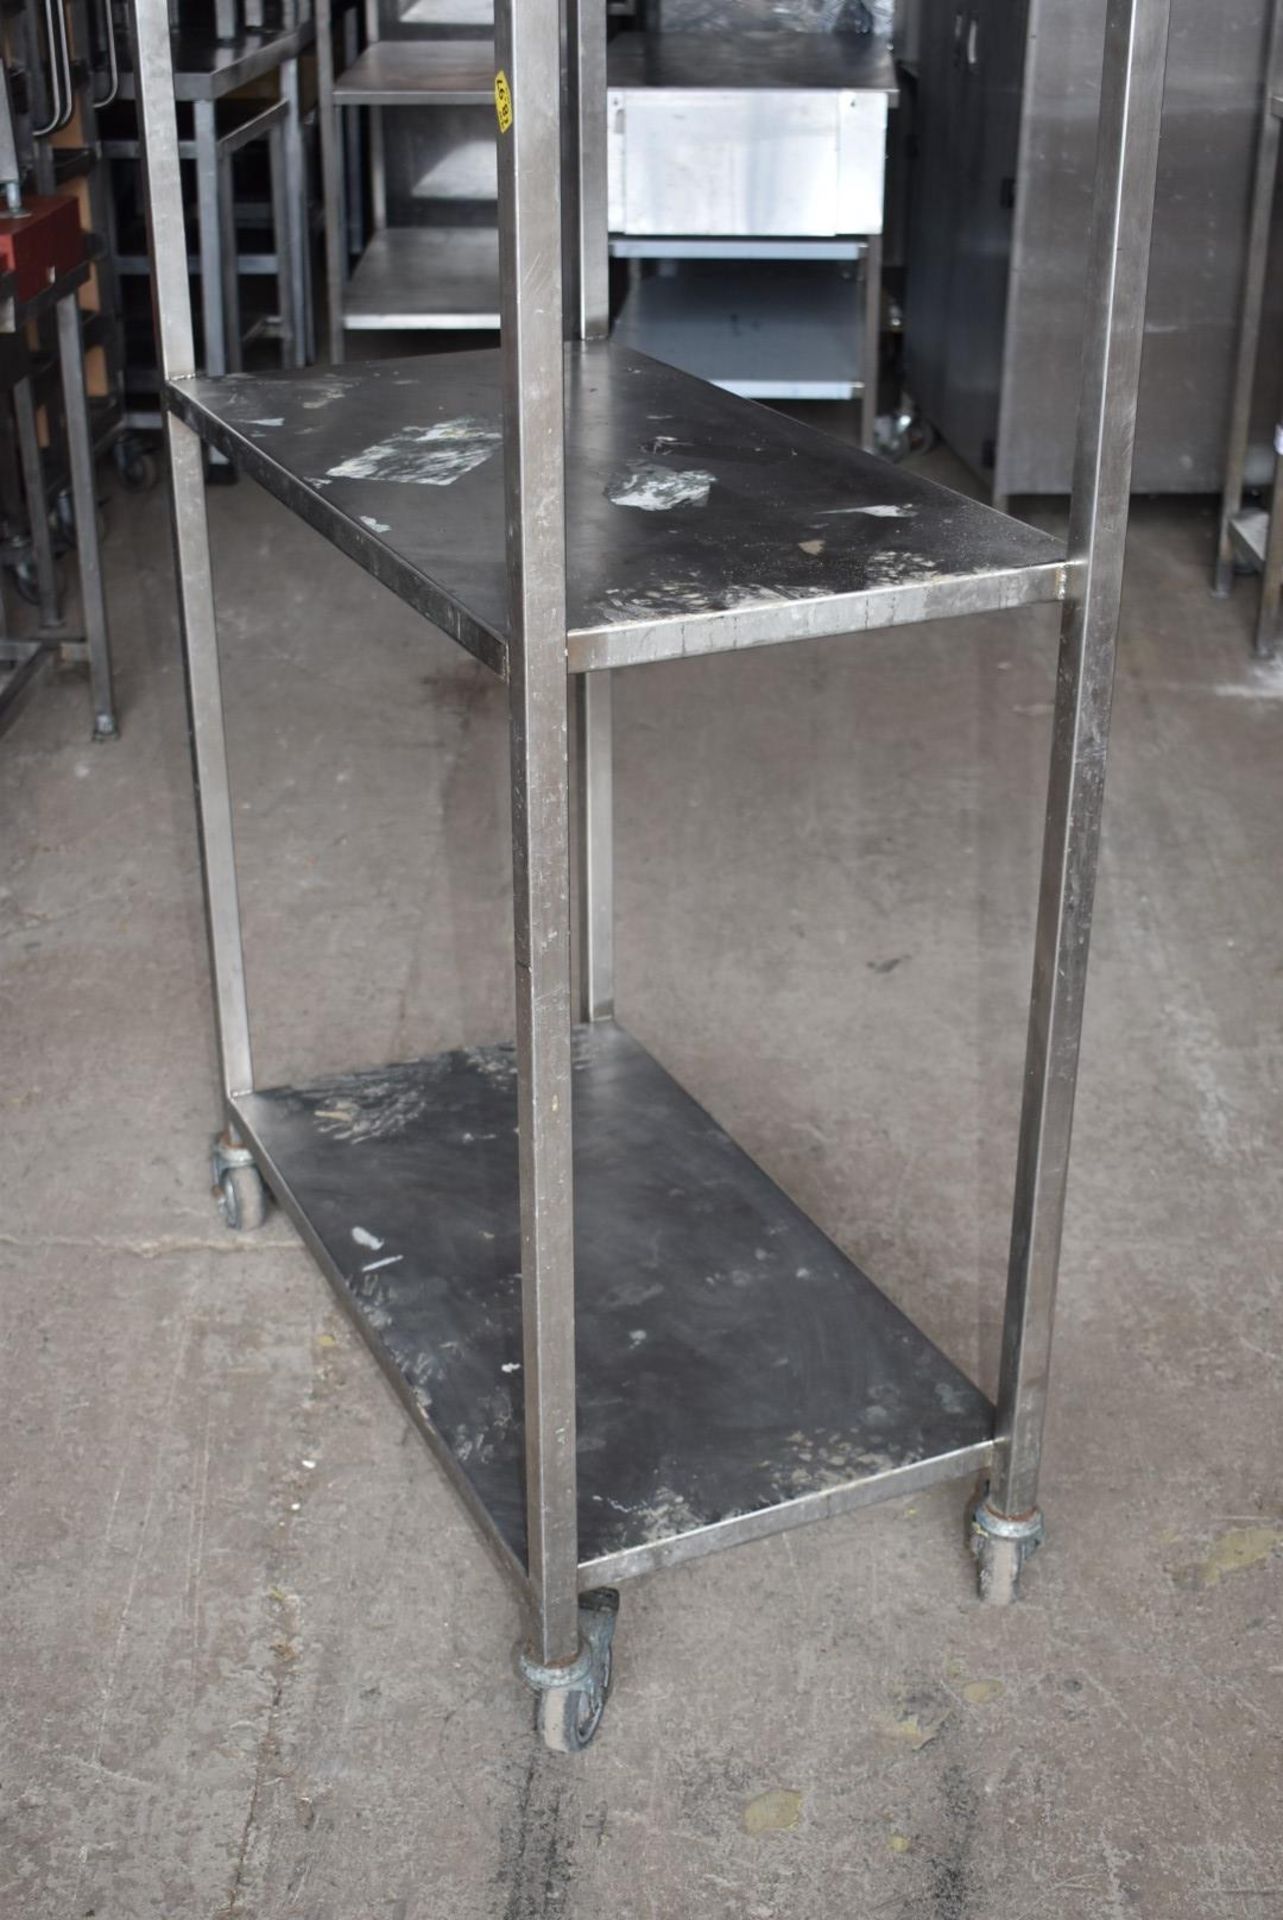 1 x Stainless Steel Two Tier Shelf Unit With Castor Wheels - Dimensions: H170 x W90 x D45 cms - - Image 8 of 10